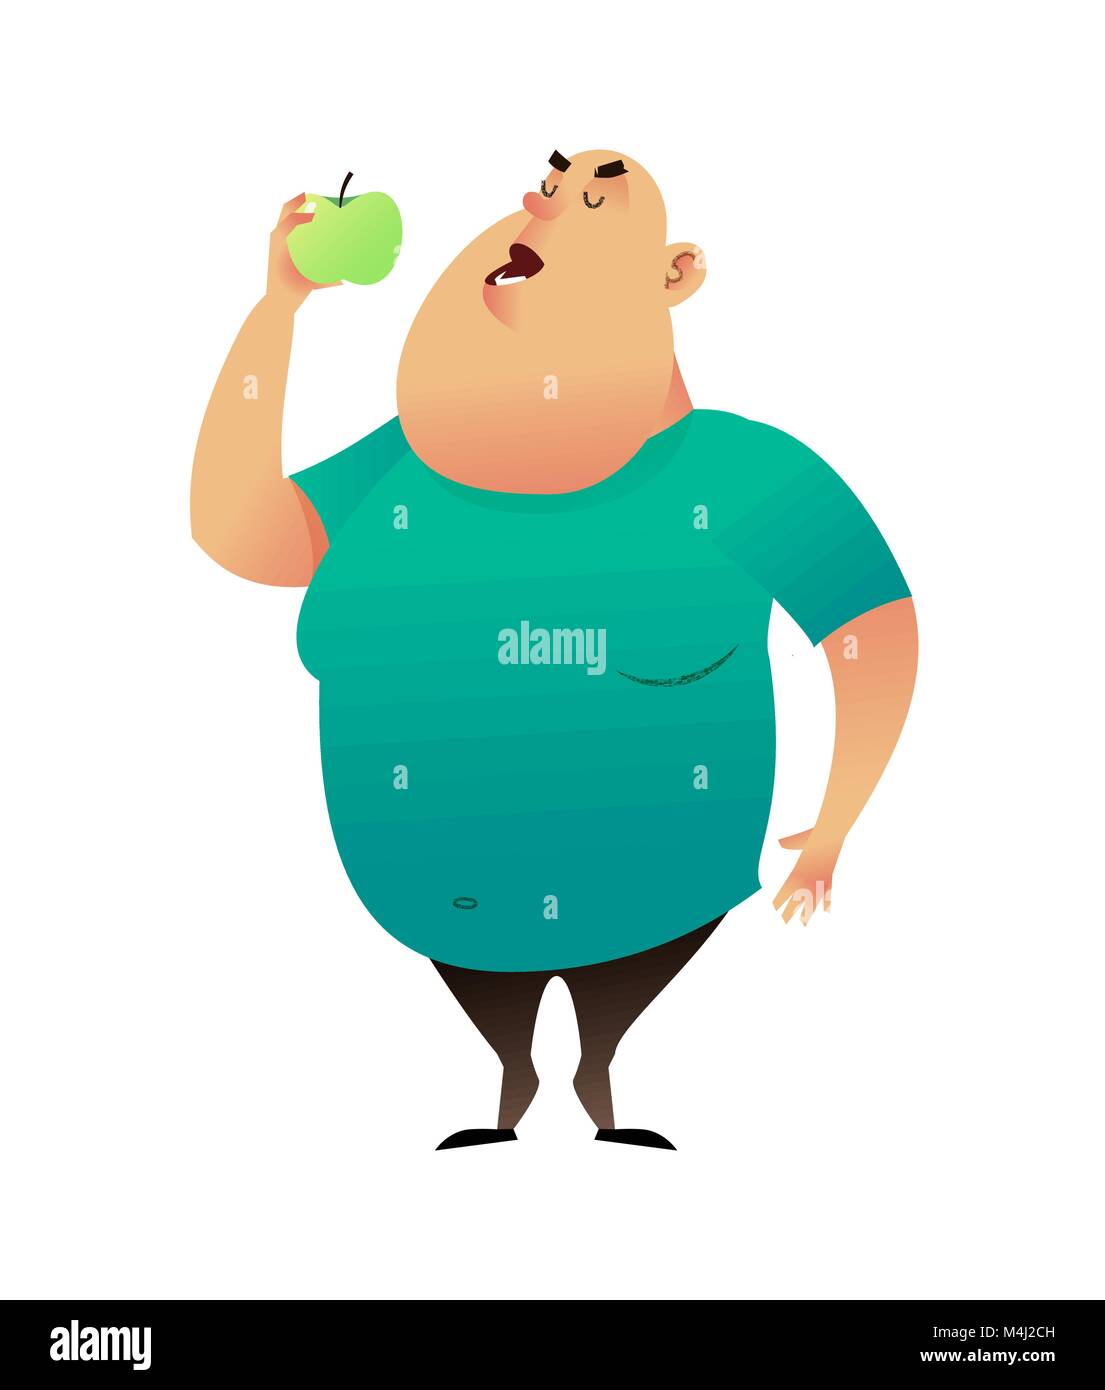 A fat man bites an apple. Useful habits and healthy eating concept. The fatty guy dreams of losing weight and chooses a healthy diet. Healthy lifestyle and proper nutrition lifestyle. Stock Vector